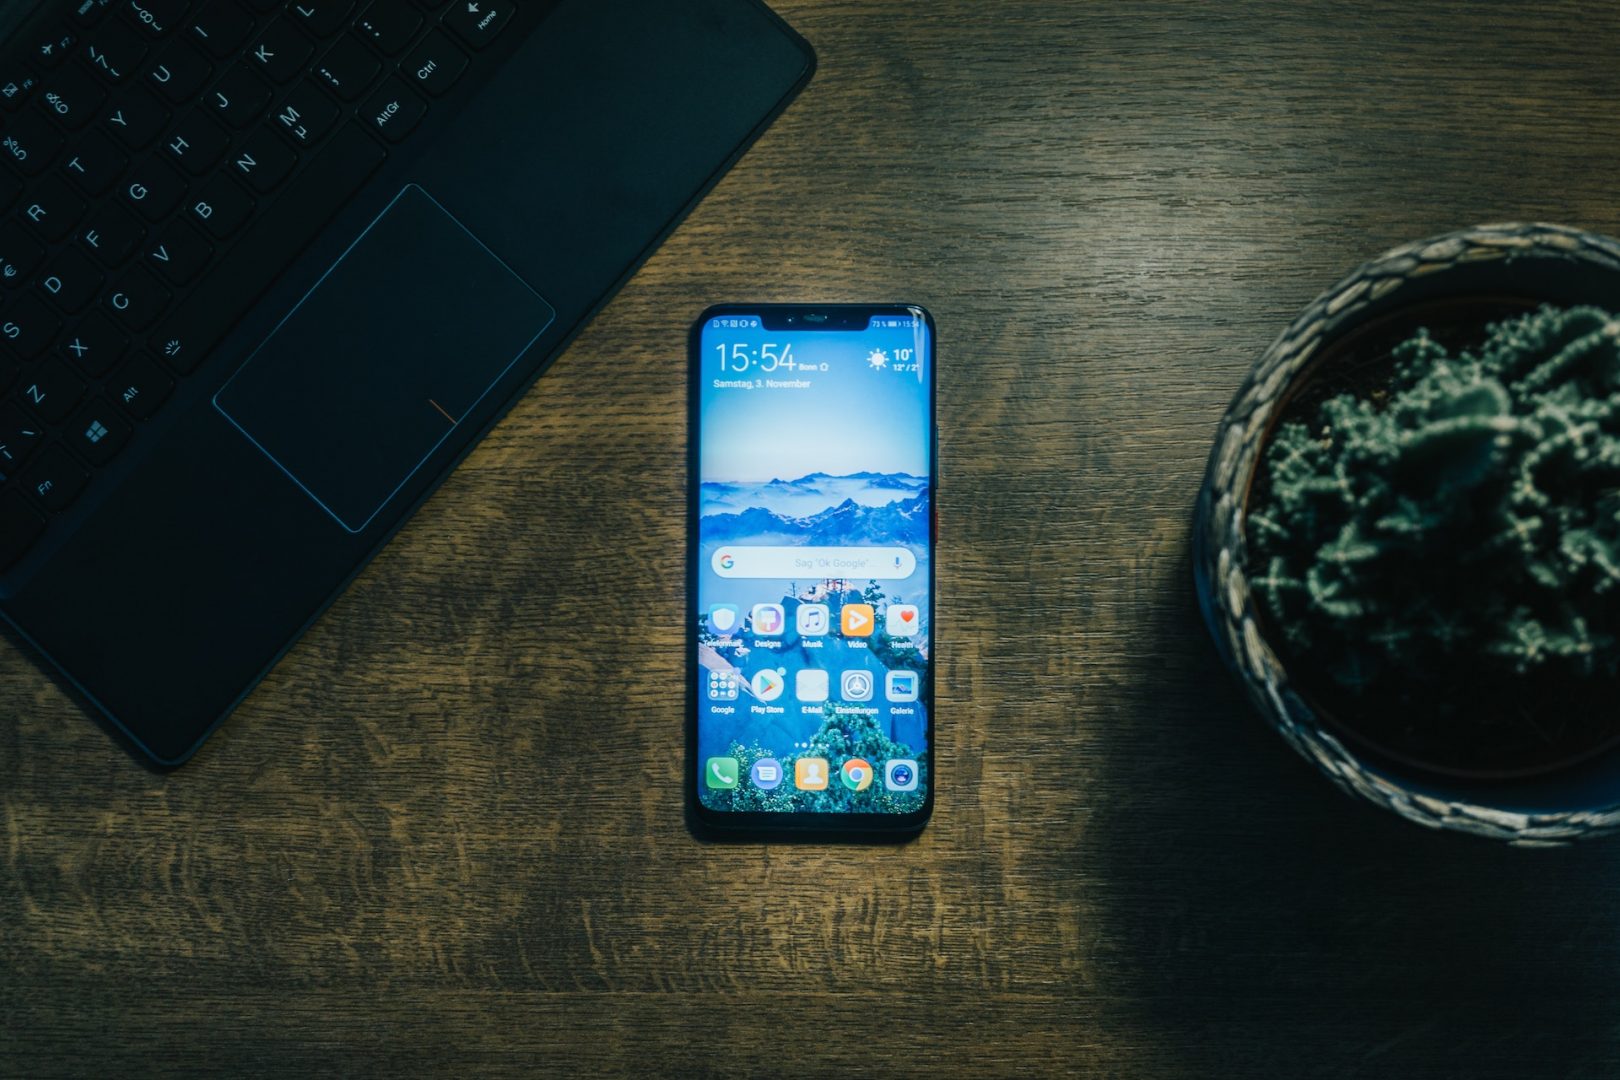 Huawei Mate 20 Pro Android phone